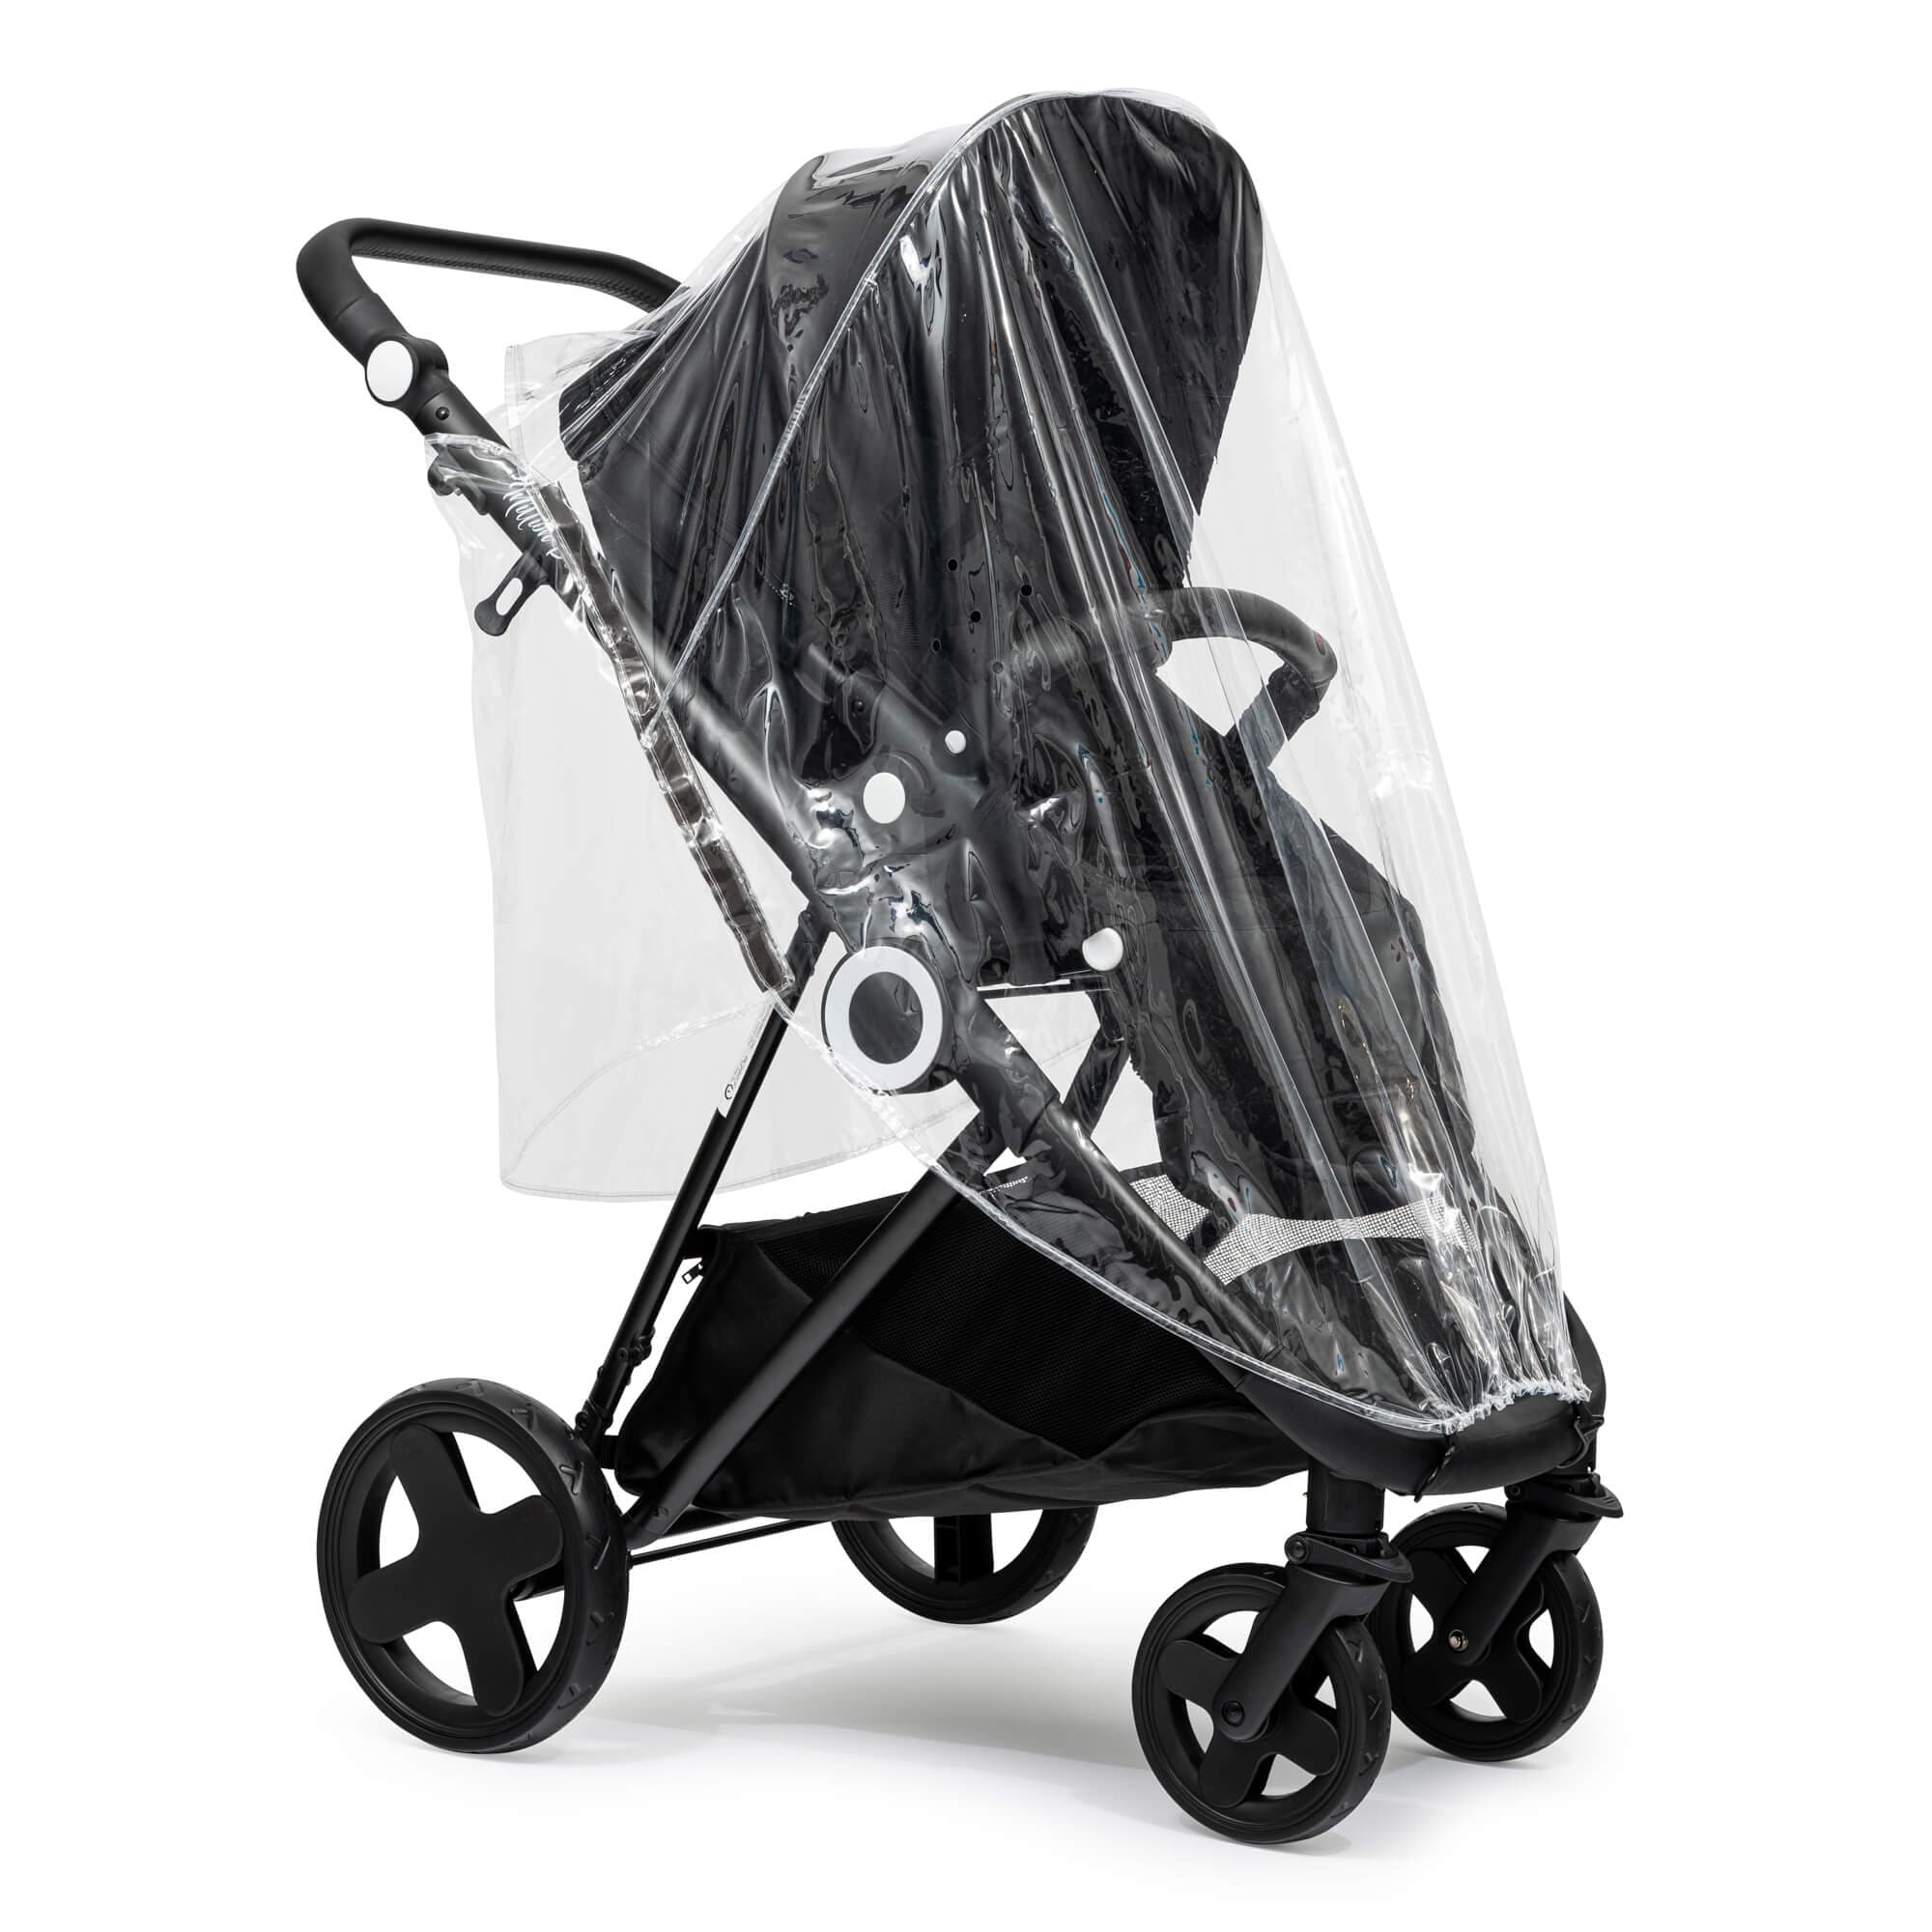 Pushchair Raincover Compatible With Little Shield - For Your Little One